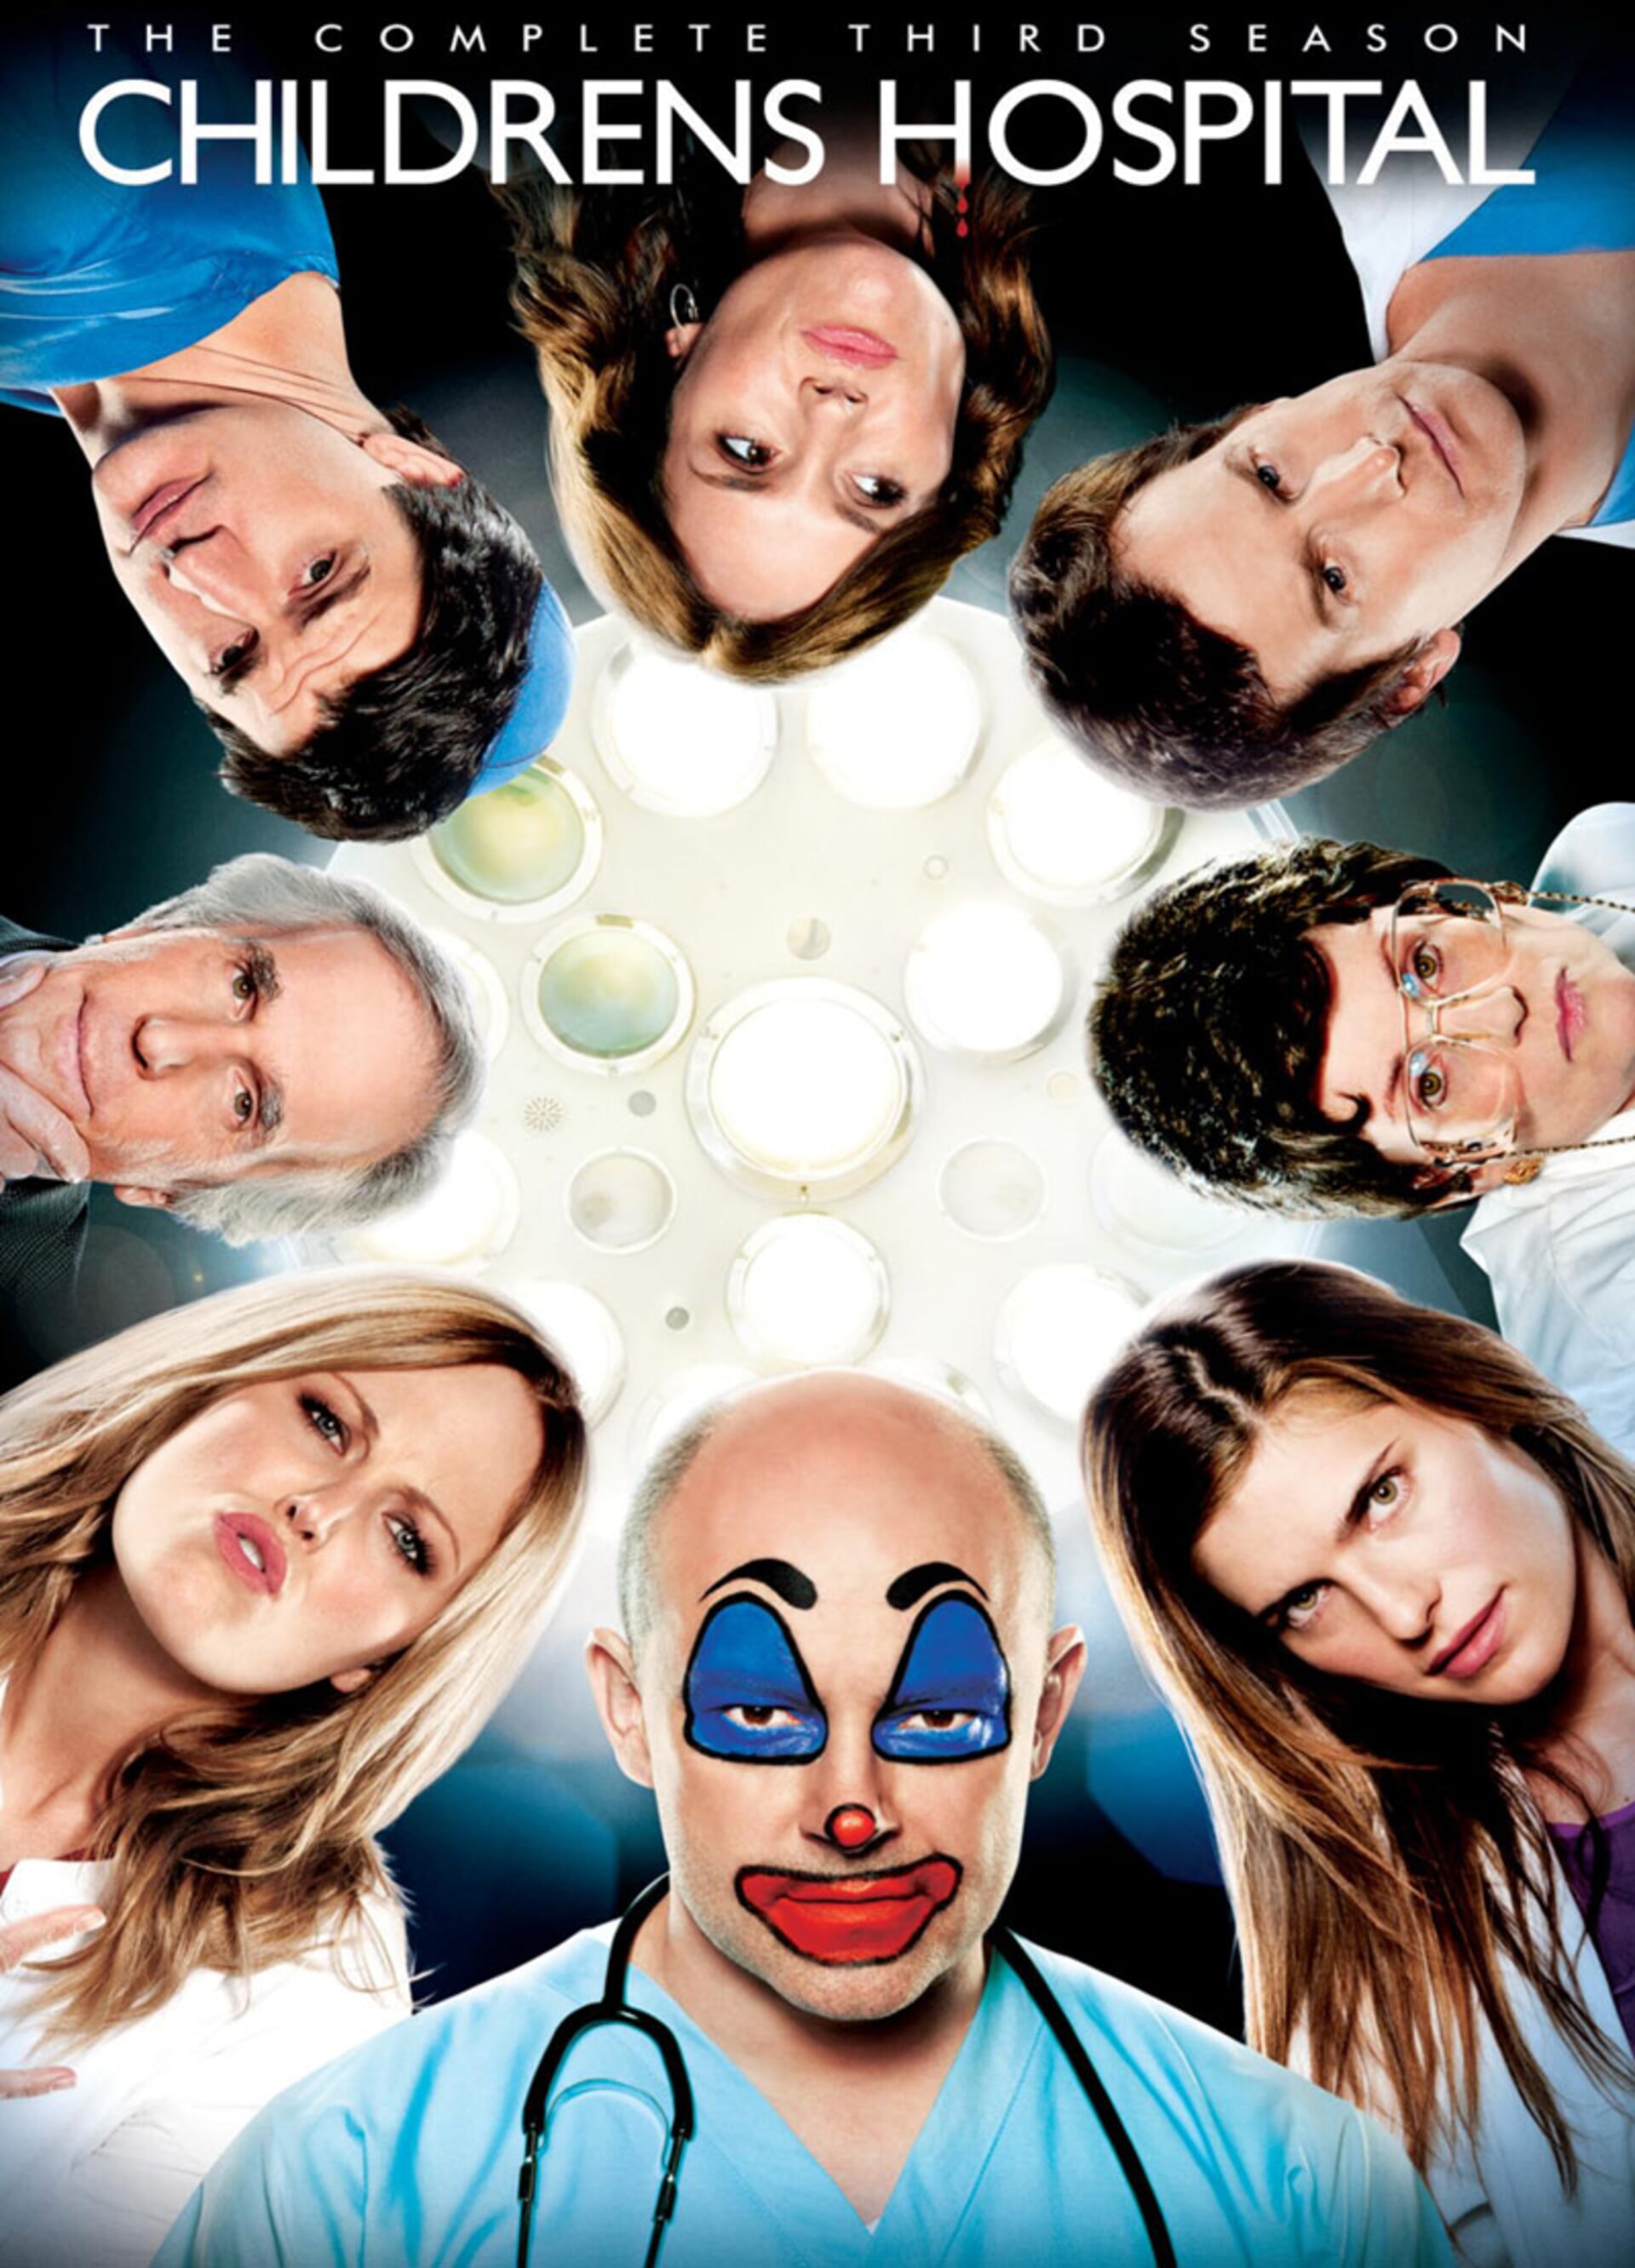 Is Childrens Hospital a good show?